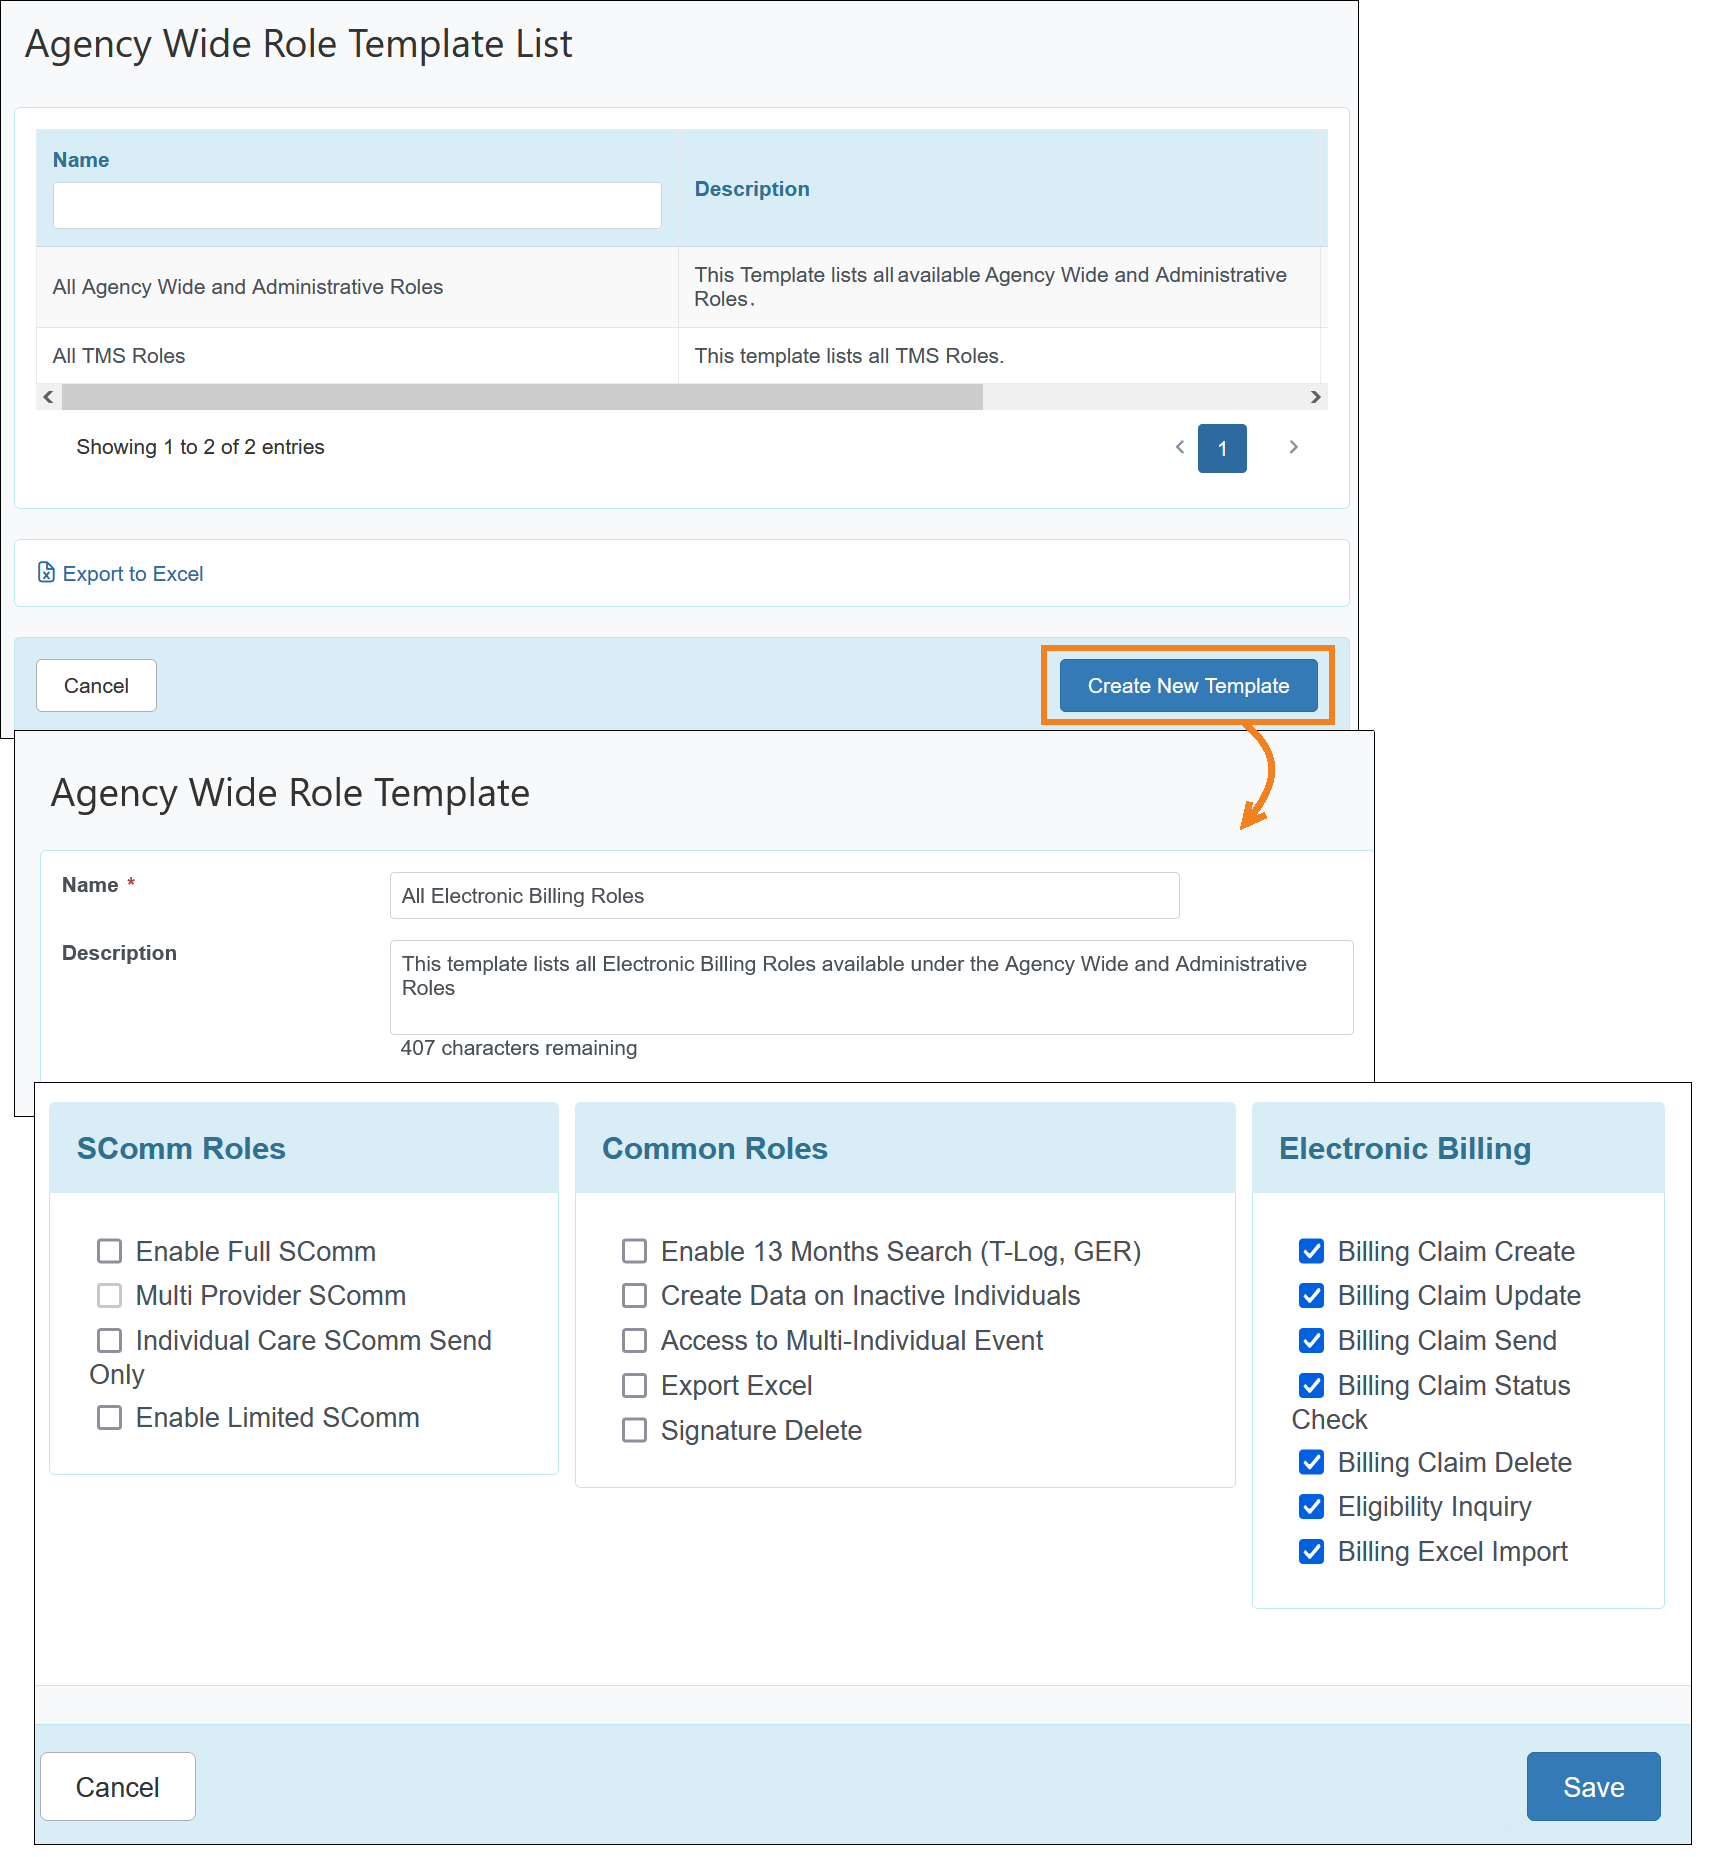 Screenshot showing the Agency Wide Role Template List and Agency Wide Role Template page